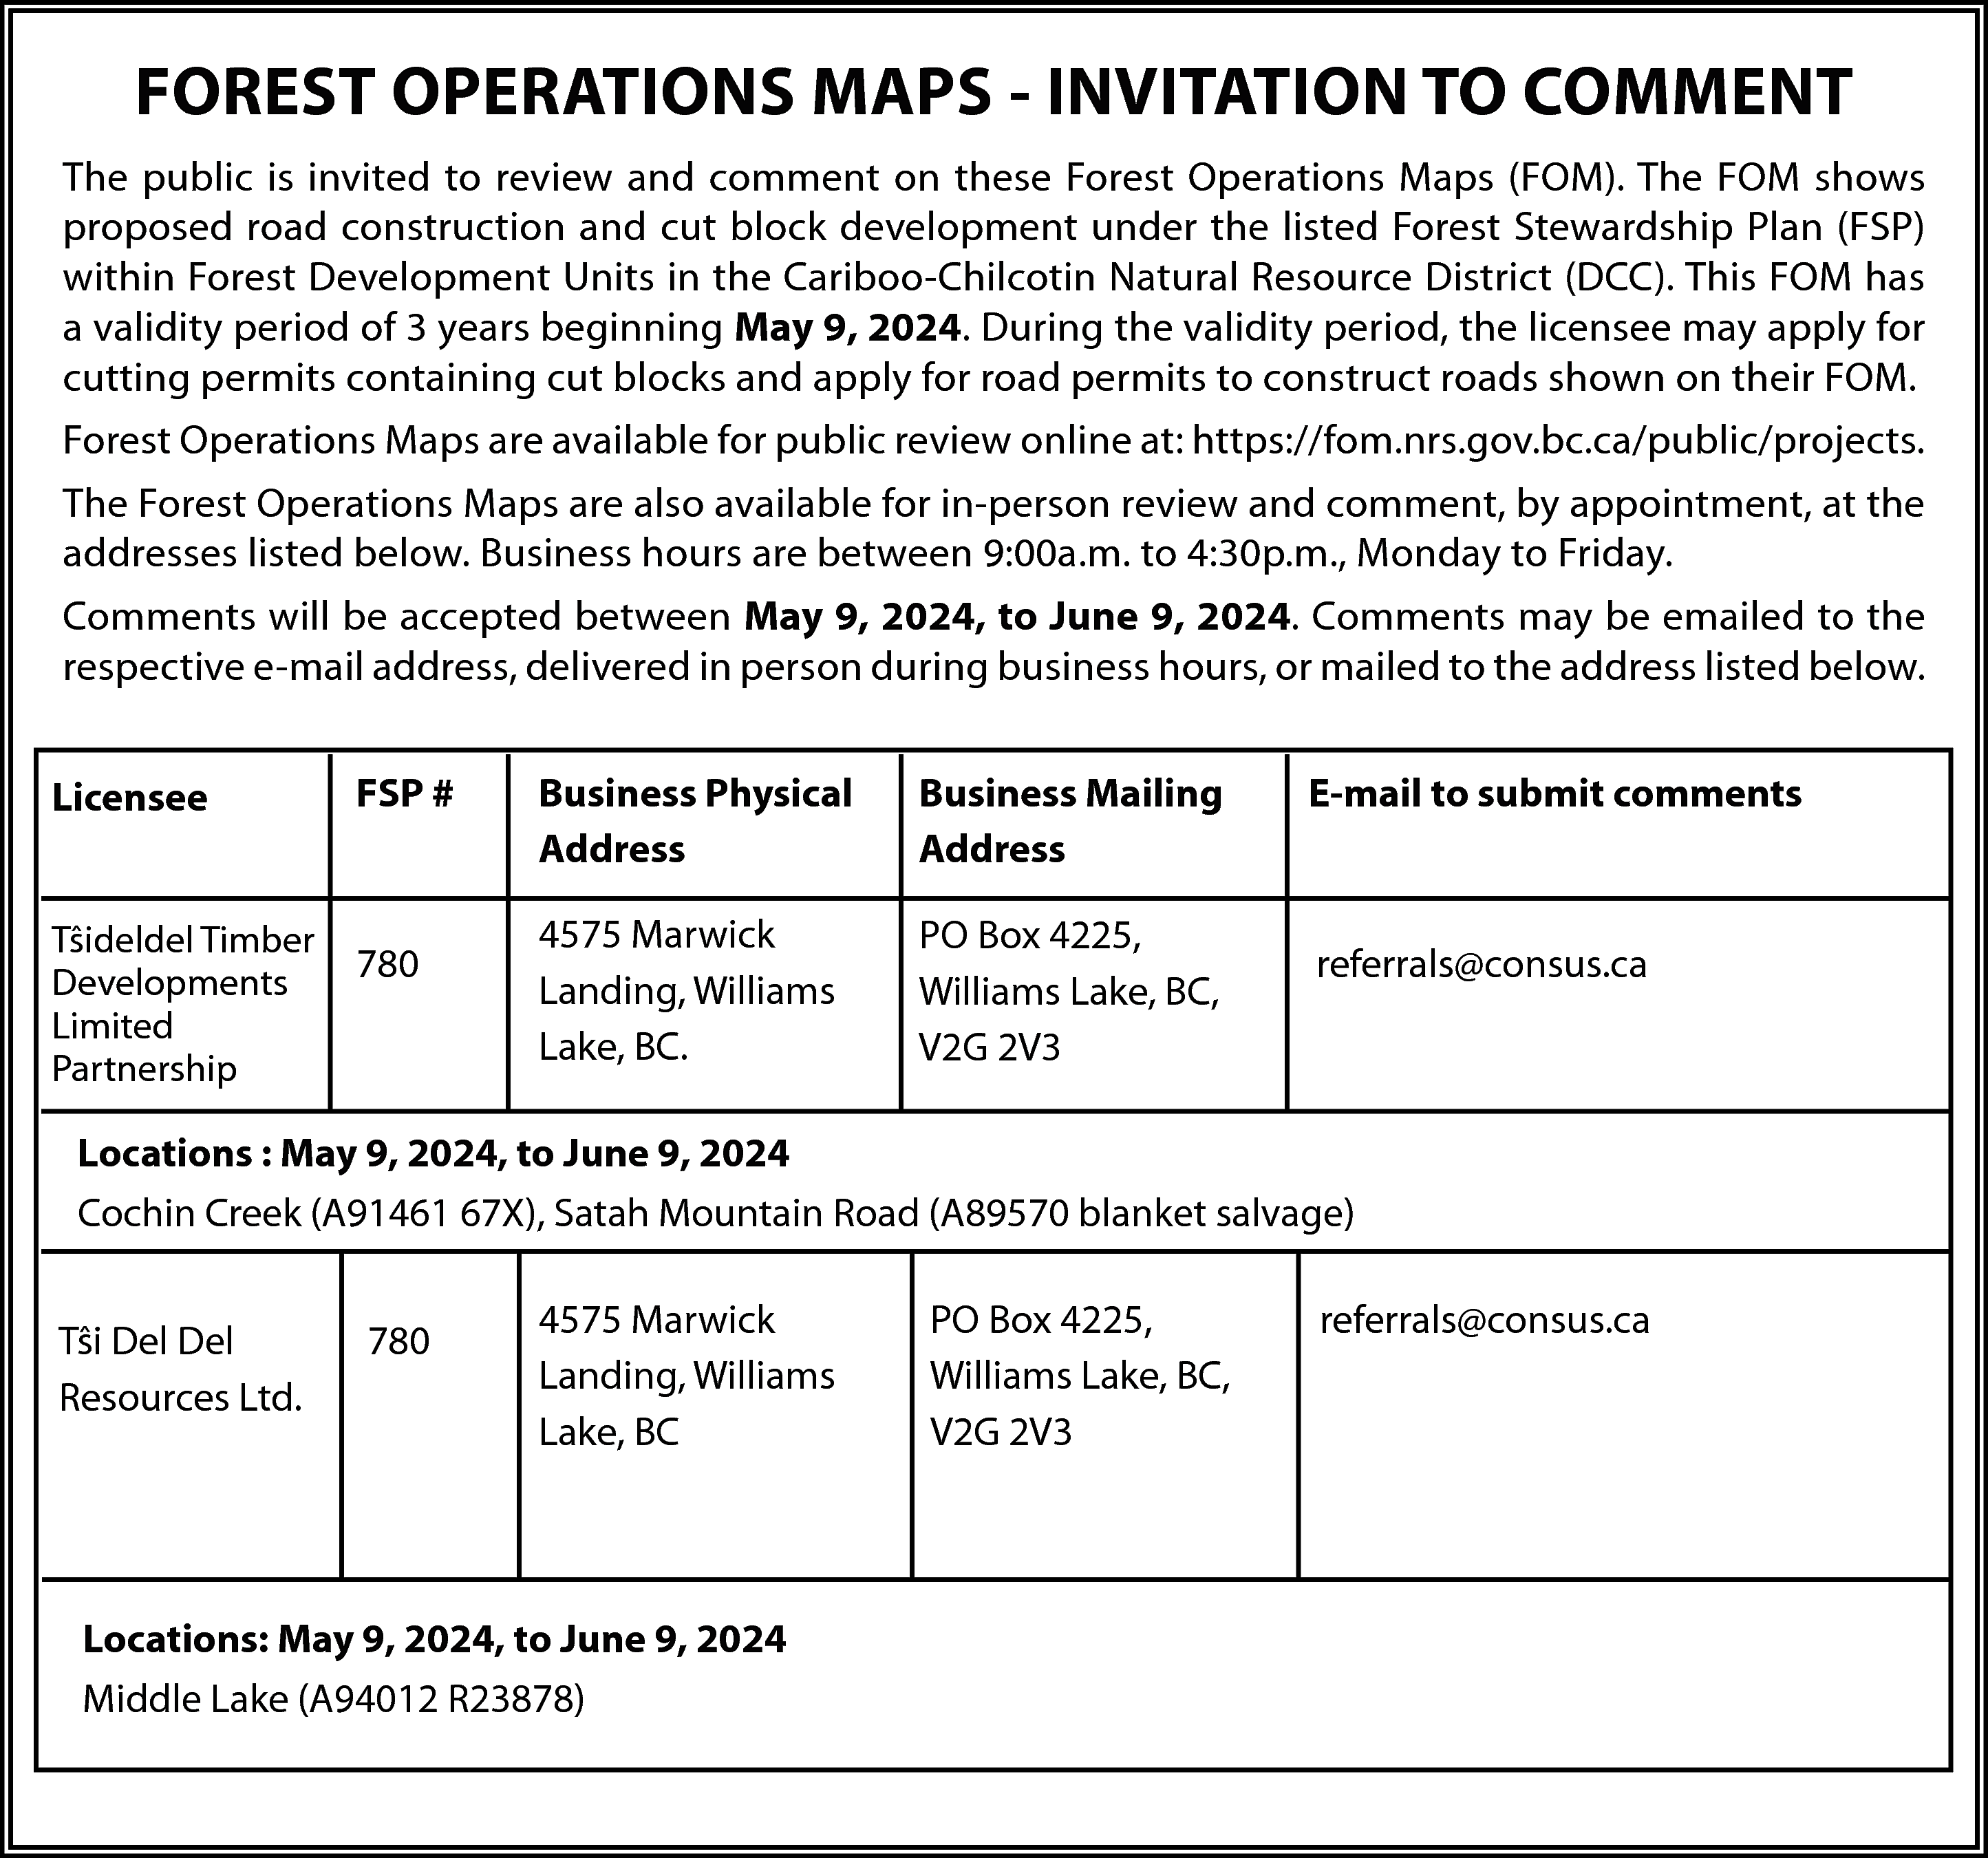 FOREST OPERATIONS MAPS - INVITATION  FOREST OPERATIONS MAPS - INVITATION TO COMMENT  The public is invited to review and comment on these Forest Operations Maps (FOM). The FOM shows  proposed road construction and cut block development under the listed Forest Stewardship Plan (FSP)  within Forest Development Units in the Cariboo-Chilcotin Natural Resource District (DCC). This FOM has  a validity period of 3 years beginning May 9, 2024. During the validity period, the licensee may apply for  cutting permits containing cut blocks and apply for road permits to construct roads shown on their FOM.  Forest Operations Maps are available for public review online at: https://fom.nrs.gov.bc.ca/public/projects.  The Forest Operations Maps are also available for in-person review and comment, by appointment, at the  addresses listed below. Business hours are between 9:00a.m. to 4:30p.m., Monday to Friday.  Comments will be accepted between May 9, 2024, to June 9, 2024. Comments may be emailed to the  respective e-mail address, delivered in person during business hours, or mailed to the address listed below.  Licensee  Tŝideldel Timber  Developments  Limited  Partnership    FSP #    780    Business Physical  Address    Business Mailing  Address    4575 Marwick  Landing, Williams  Lake, BC.    PO Box 4225,  Williams Lake, BC,  V2G 2V3    E-mail to submit comments    referrals@consus.ca    Locations : May 9, 2024, to June 9, 2024  Cochin Creek (A91461 67X), Satah Mountain Road (A89570 blanket salvage)  Tŝi Del Del  Resources Ltd.    780    4575 Marwick  Landing, Williams  Lake, BC    Locations: May 9, 2024, to June 9, 2024  Middle Lake (A94012 R23878)    PO Box 4225,  Williams Lake, BC,  V2G 2V3    referrals@consus.ca    